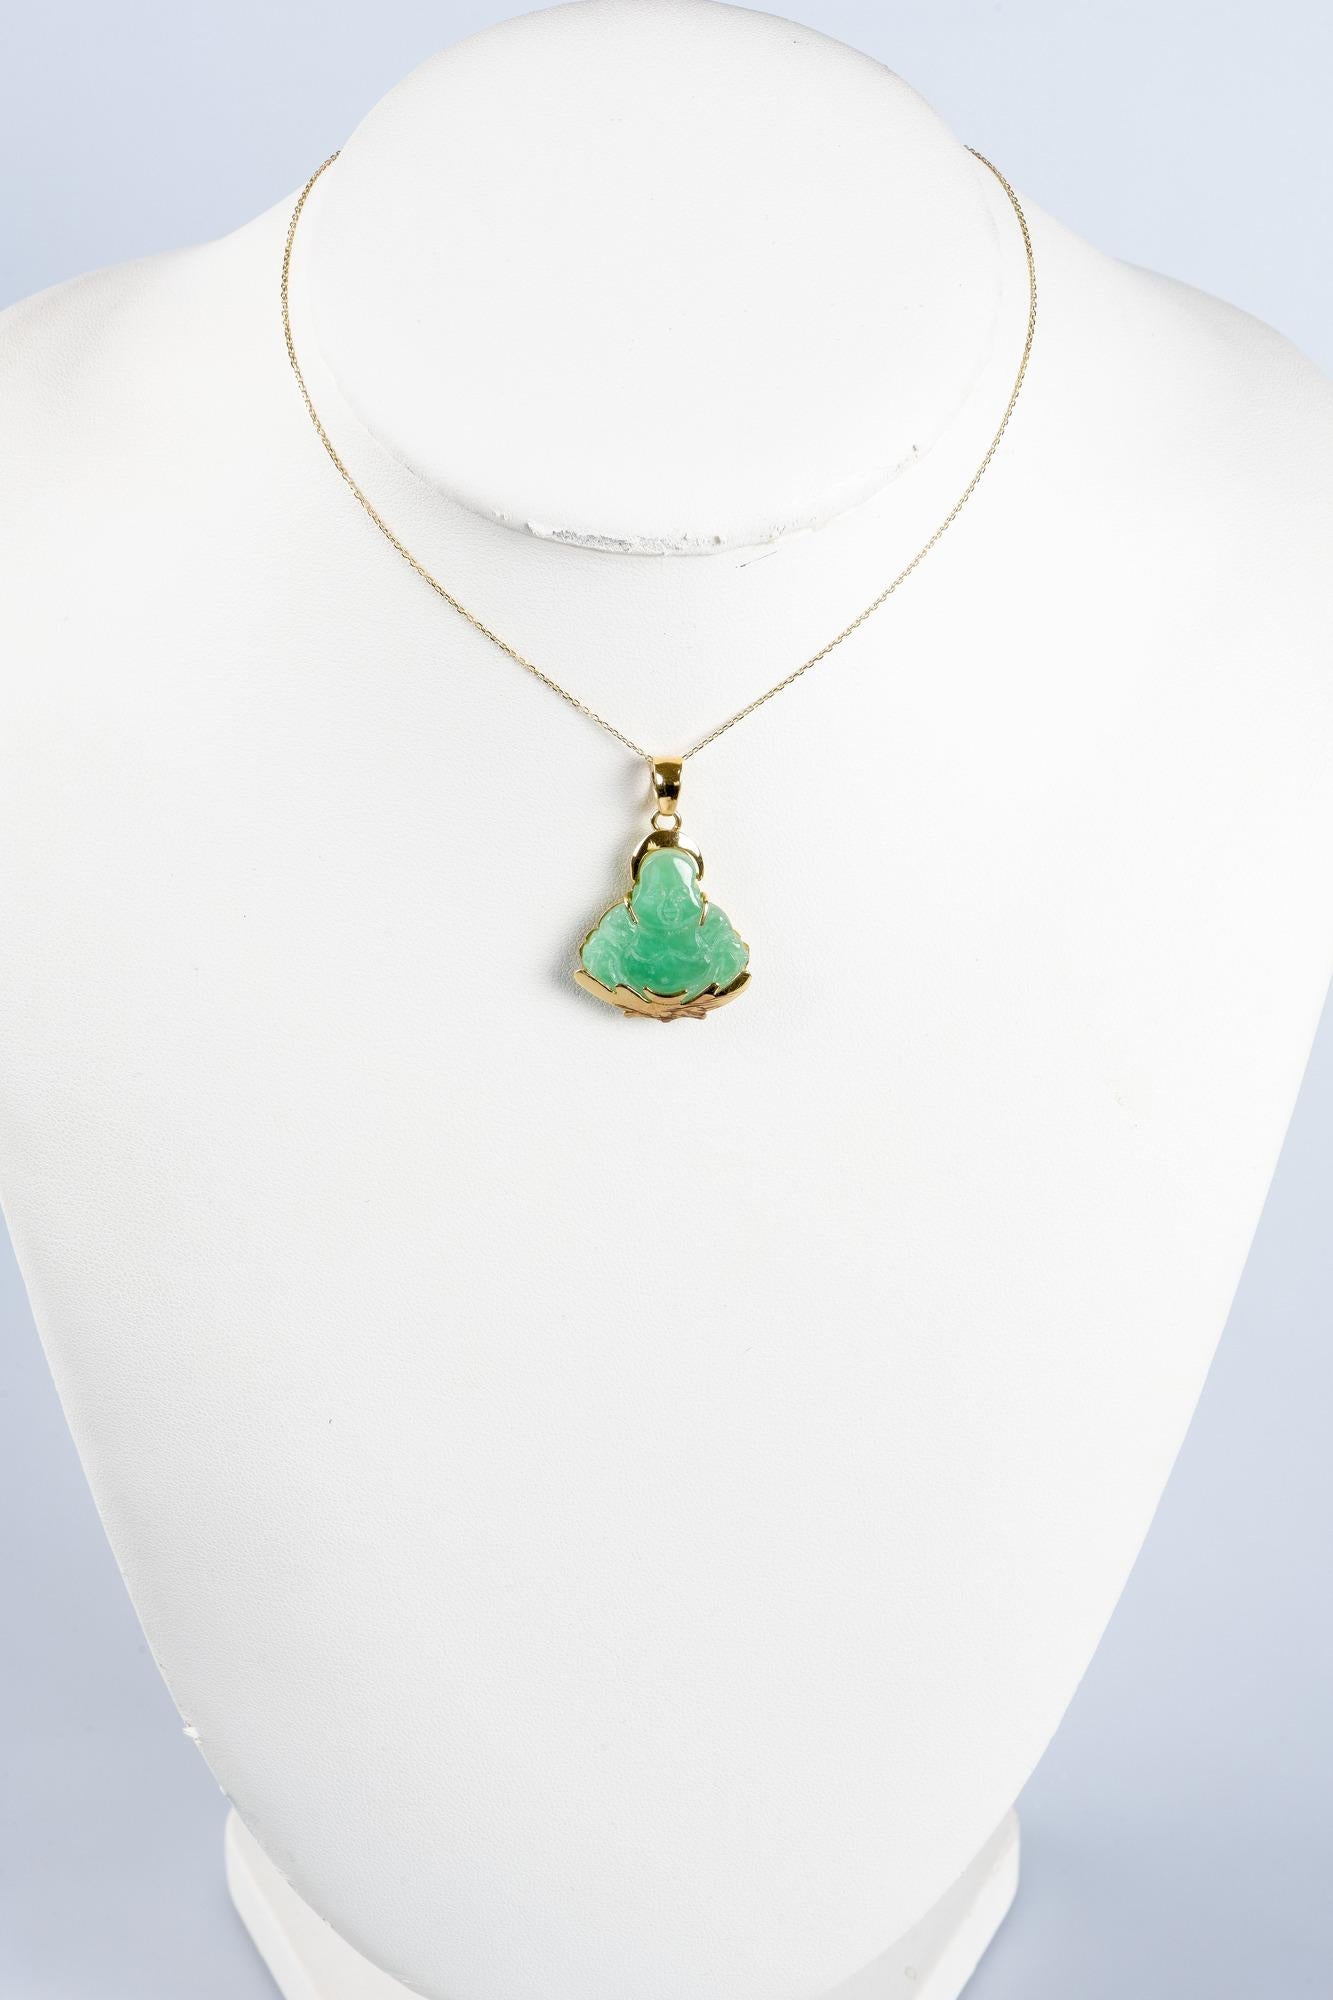 Necklace in 14 carats yellow gold composed of a chain in mesh and a pendant in the shape of Buddha decorated with a jade. The pendant represents the shape of a statue of Buddha, emblematic symbol of Buddhist spirituality and wisdom. It is made of